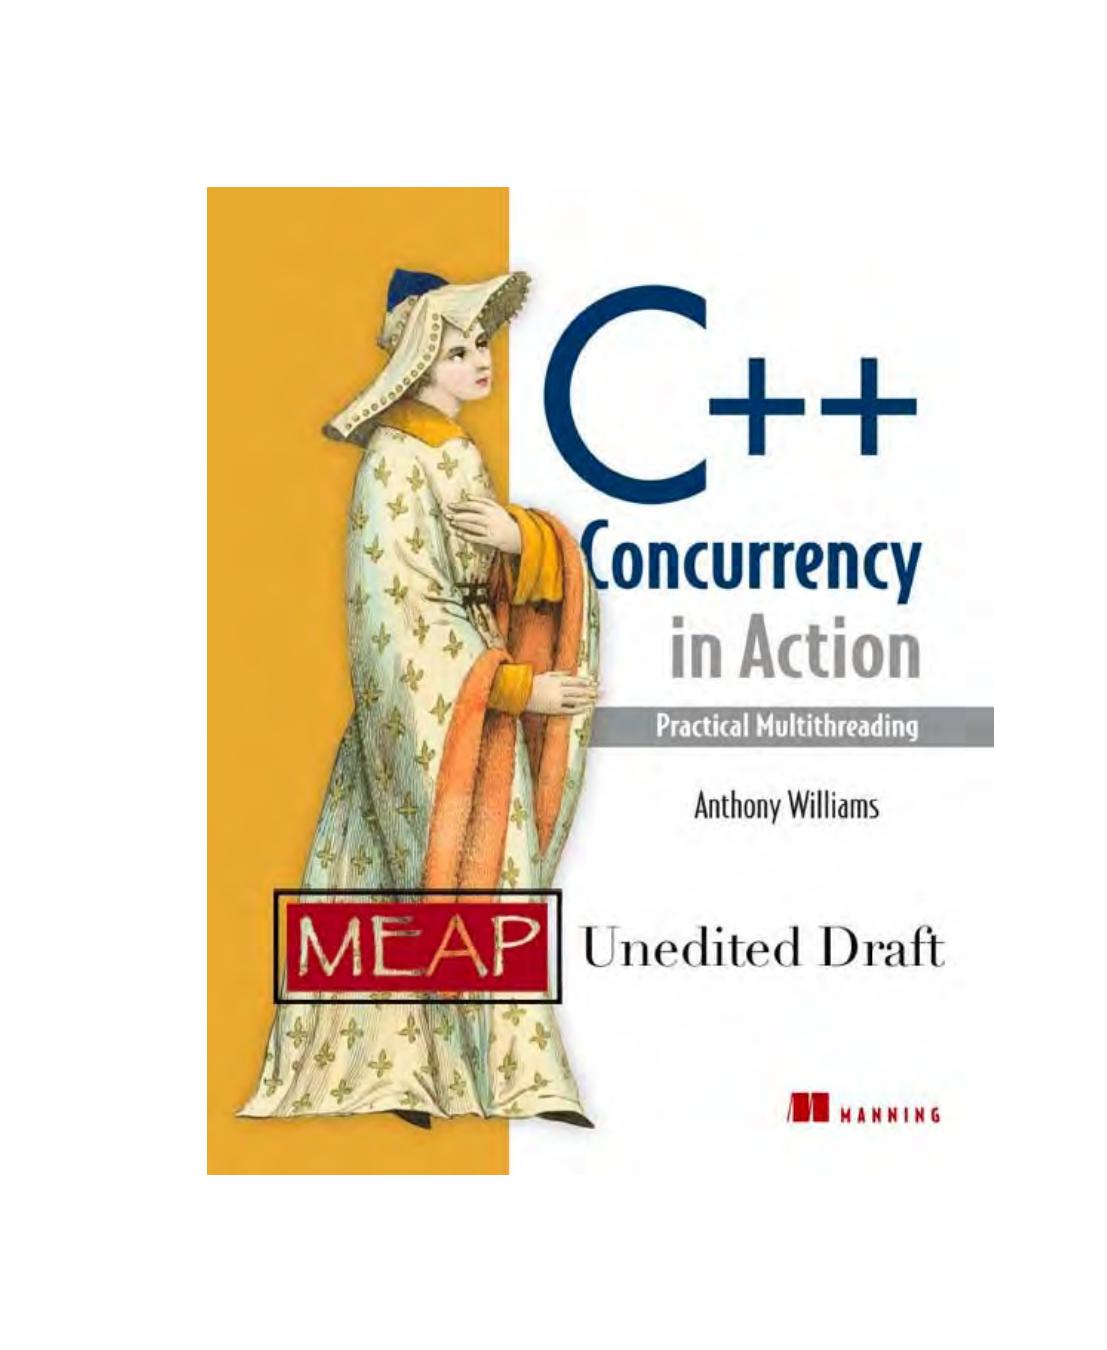 C++ Concurrency in Action: Practical Multithreading by Anthony Williams